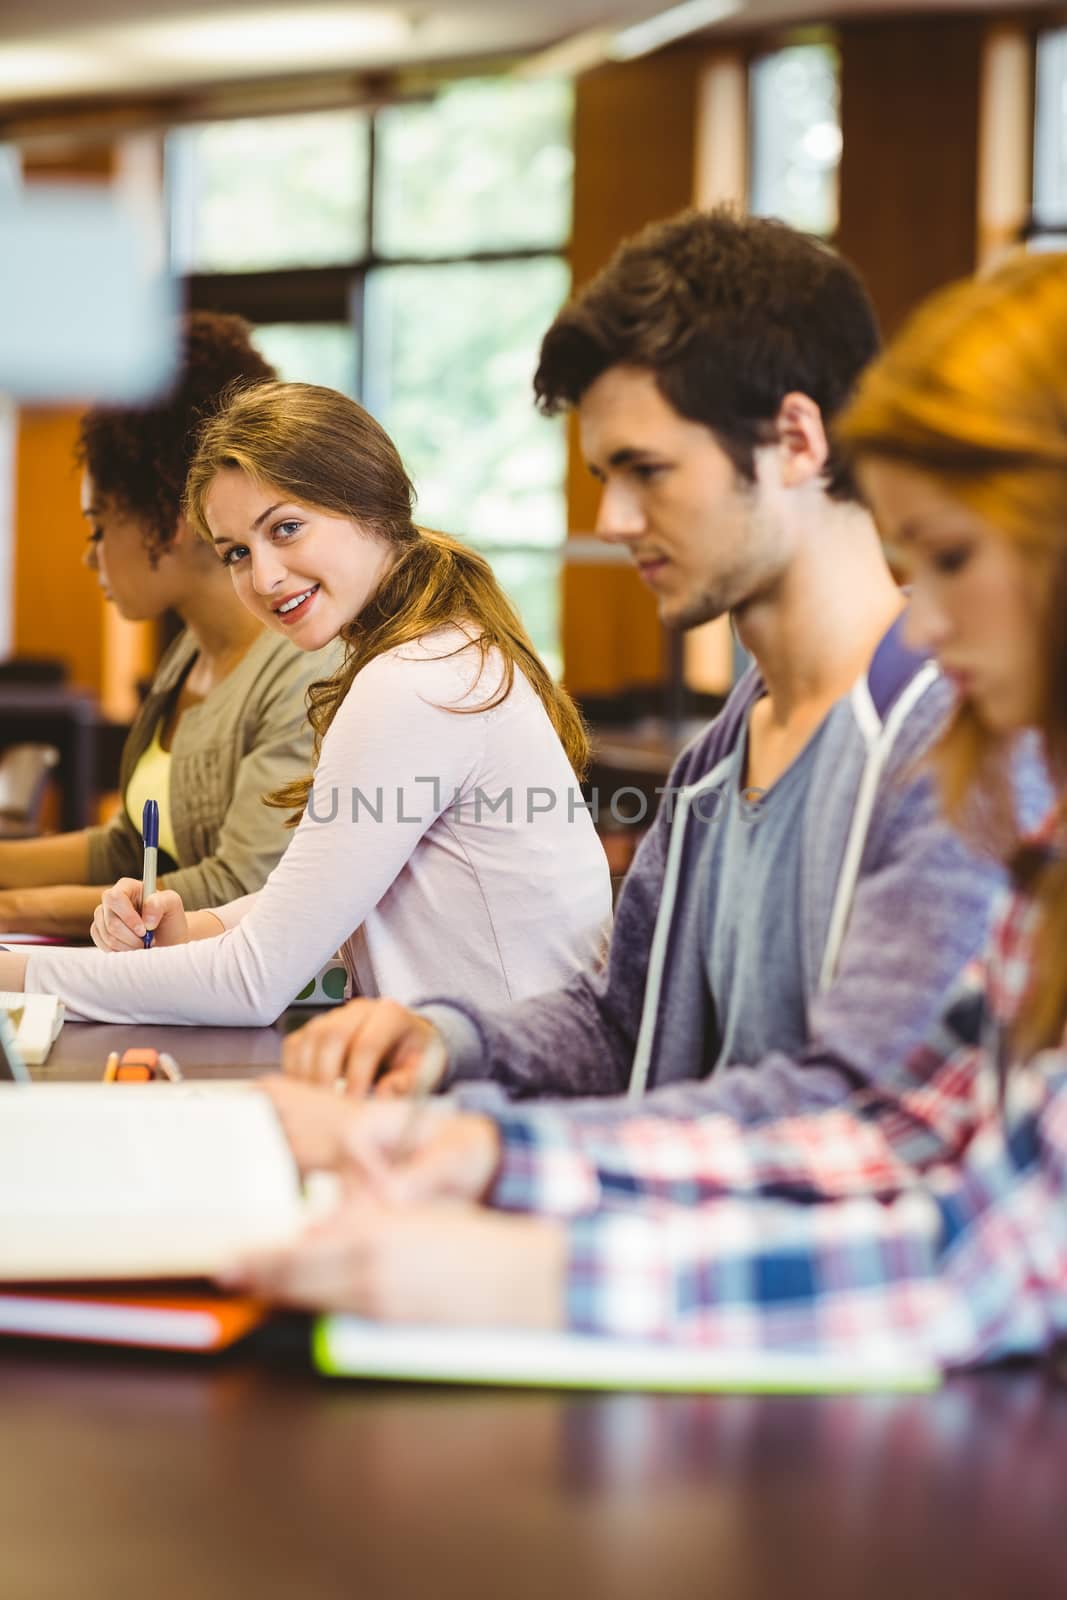 Student looking at camera while studying with classmates in library